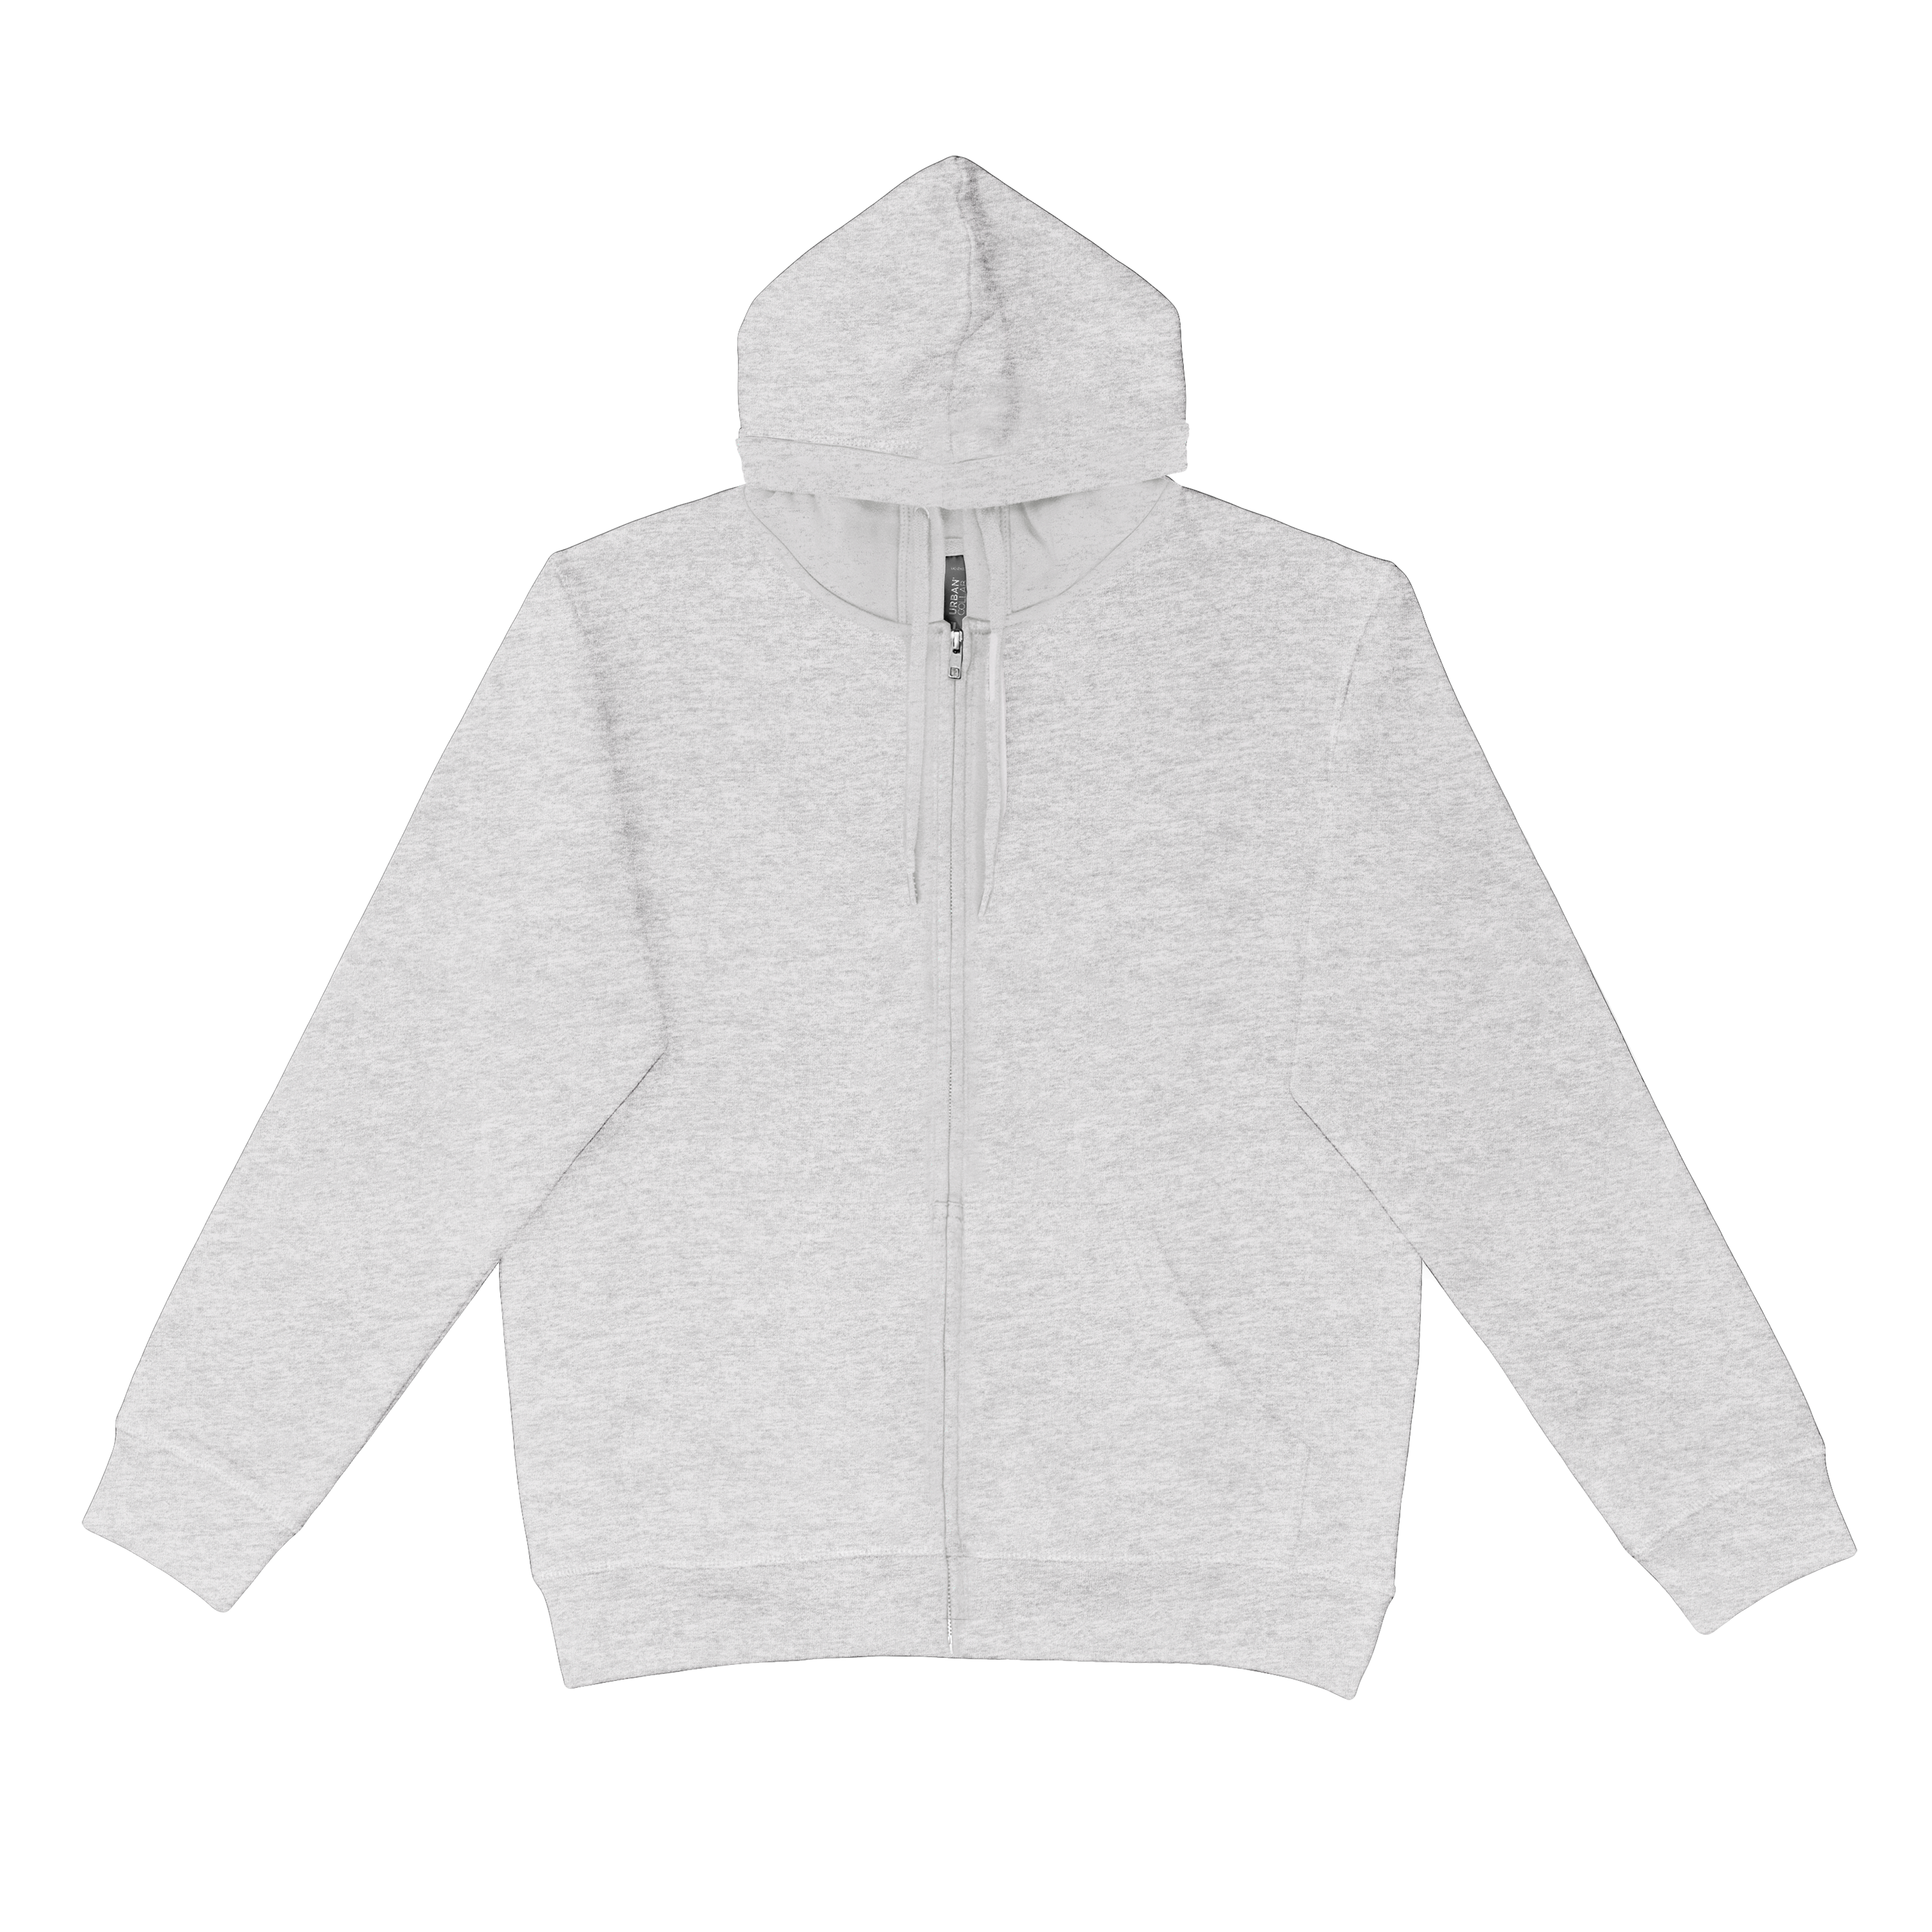 UC-Z320 - Urban Collab The <strong>BROAD</strong> Zip Hoodie-6